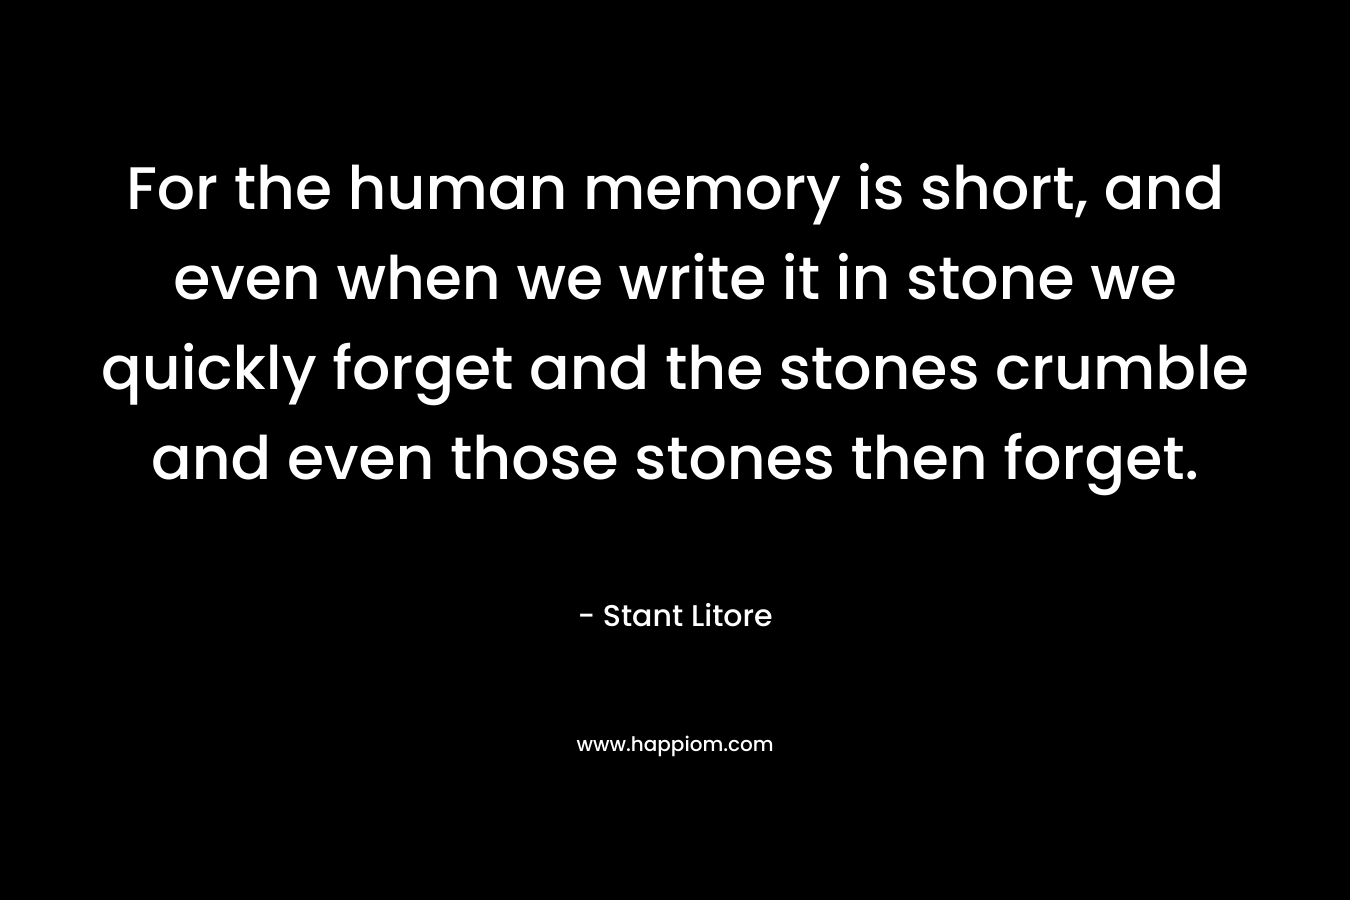 For the human memory is short, and even when we write it in stone we quickly forget and the stones crumble and even those stones then forget.